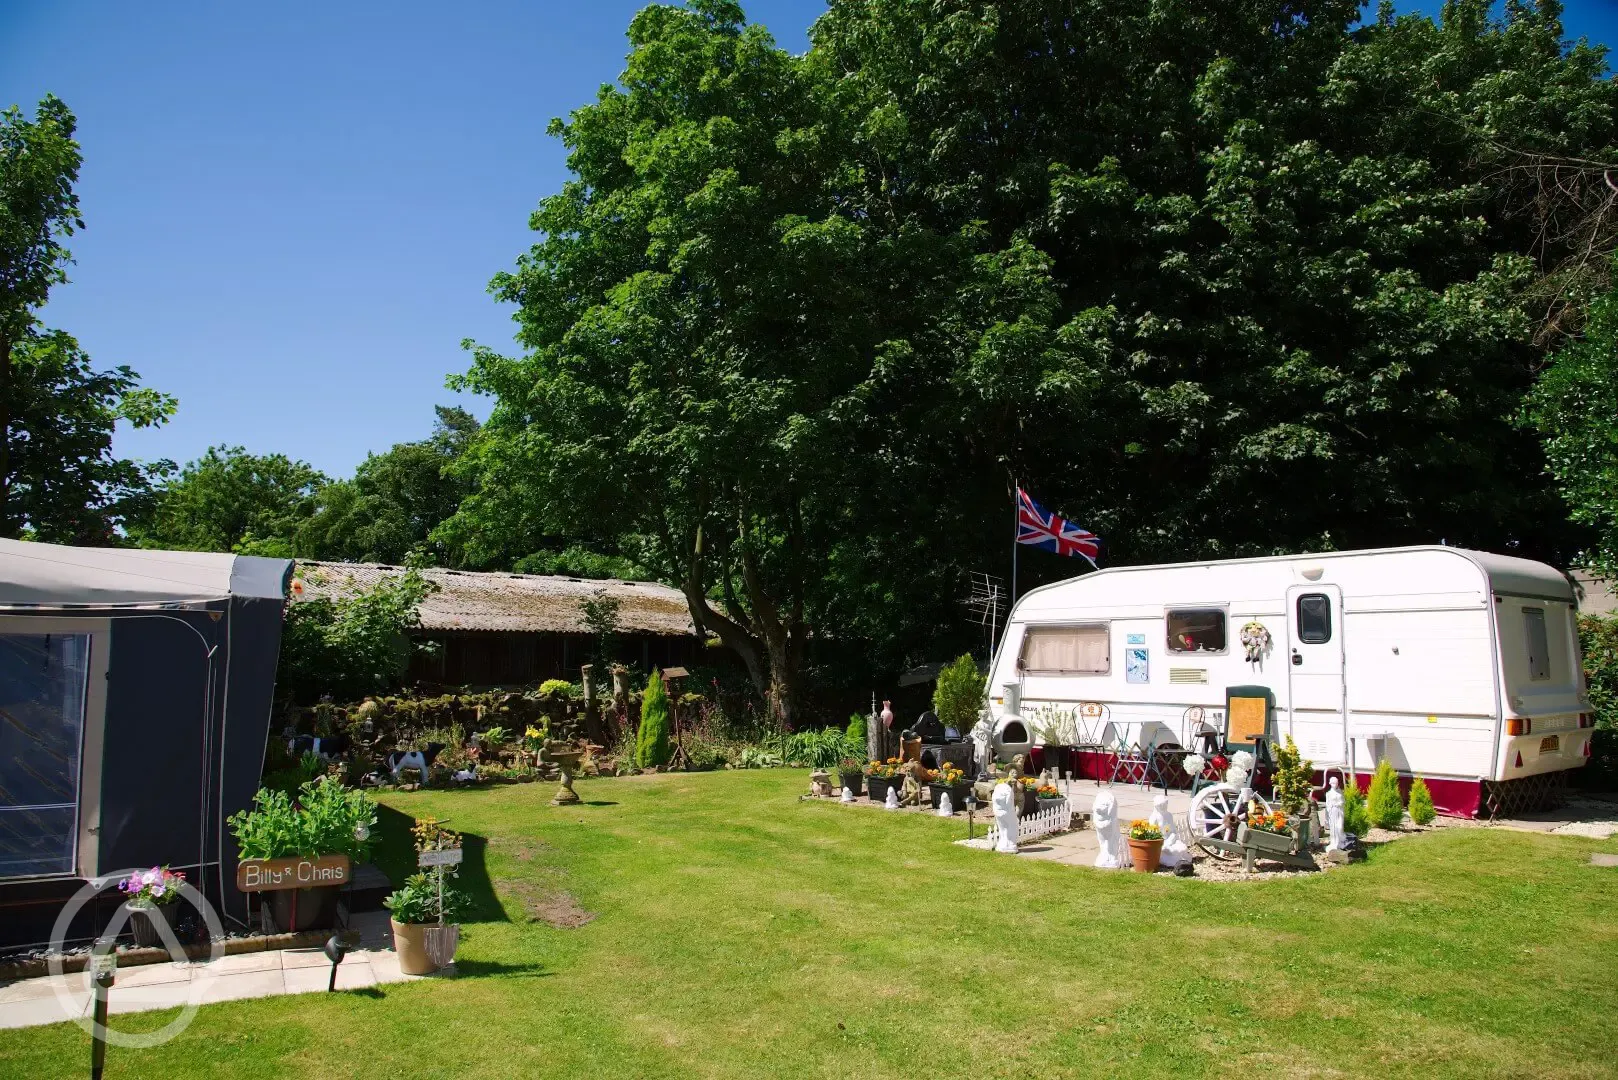 Caravans at Pinegroves Country Park